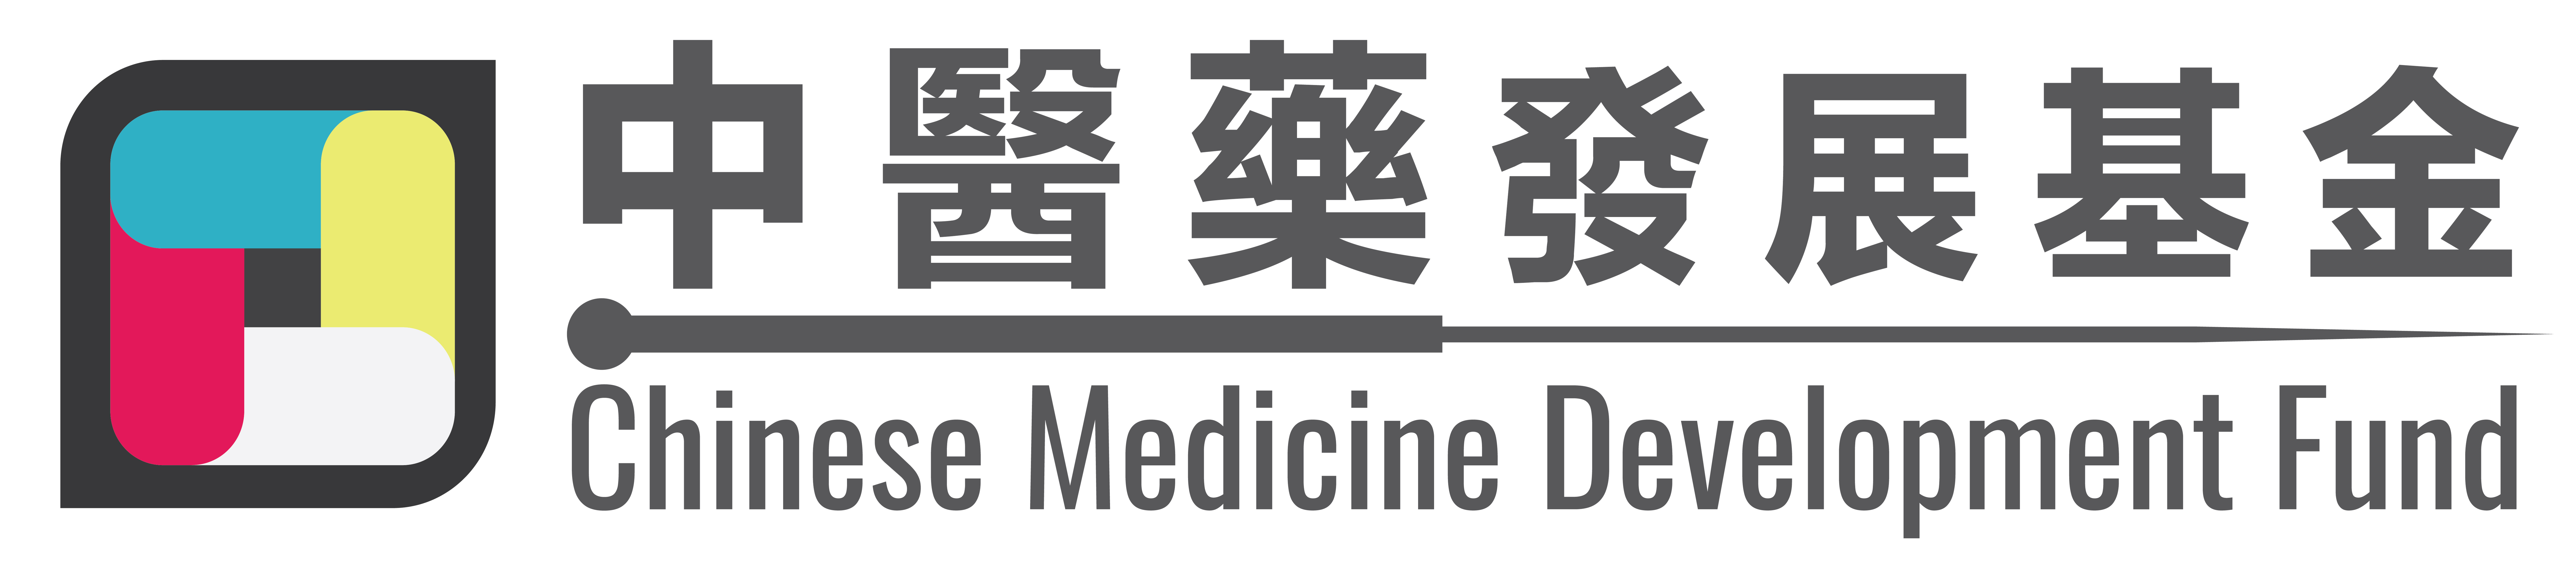 How To Make Your Product Stand Out With chineses medicine